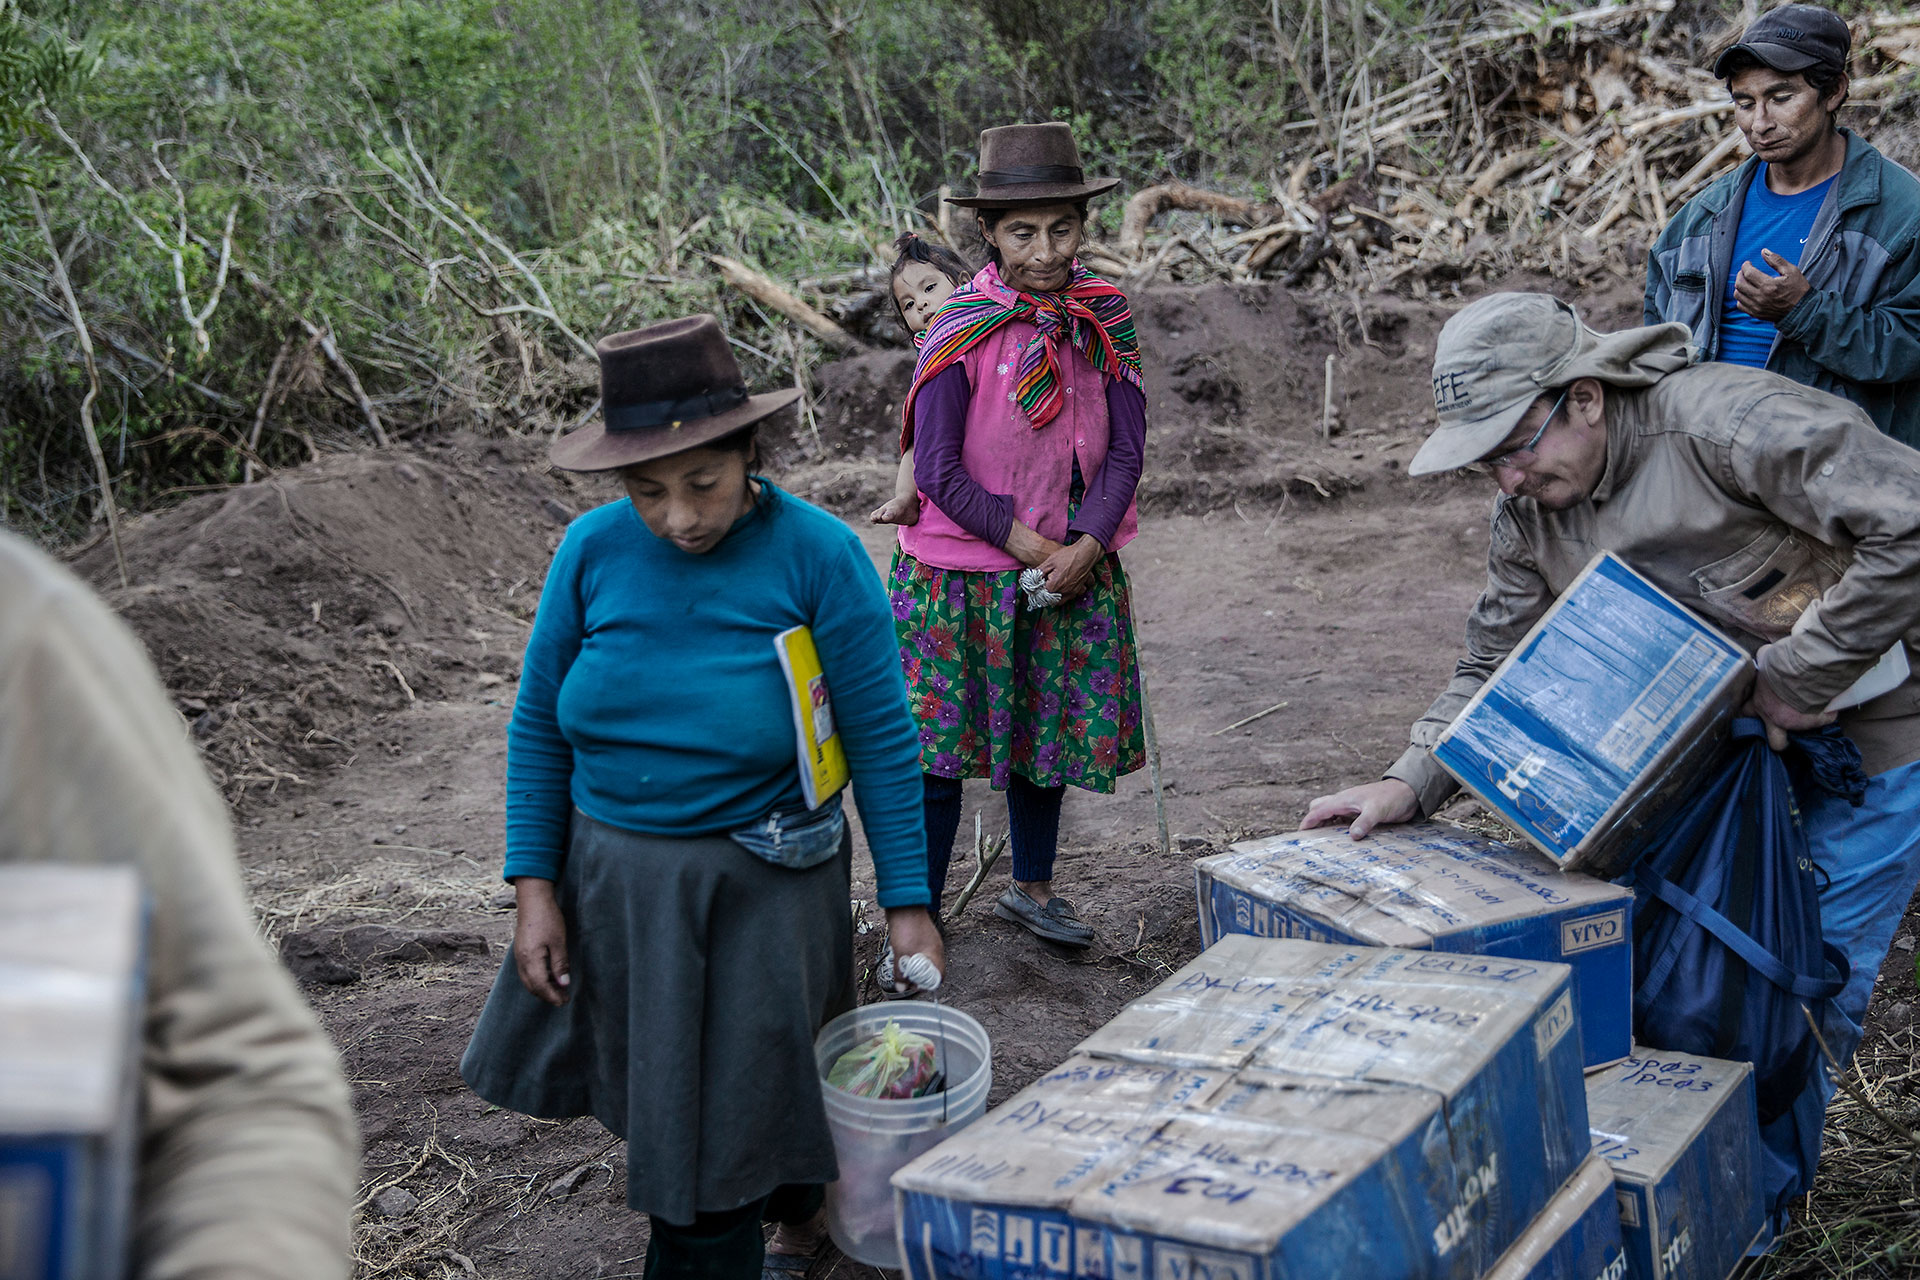 Valentín Casa (far right), his sister Teresa (center) and Valentín’s wife (left) in the place known as Suyrurupampa, where Valentín and Teresa’s mother was allegedly buried after being brutally murdered in 1986 in the east side of the Chungui district. No roads reach this point. The forensic specialists remove the bodies of 15 victims to be identified.